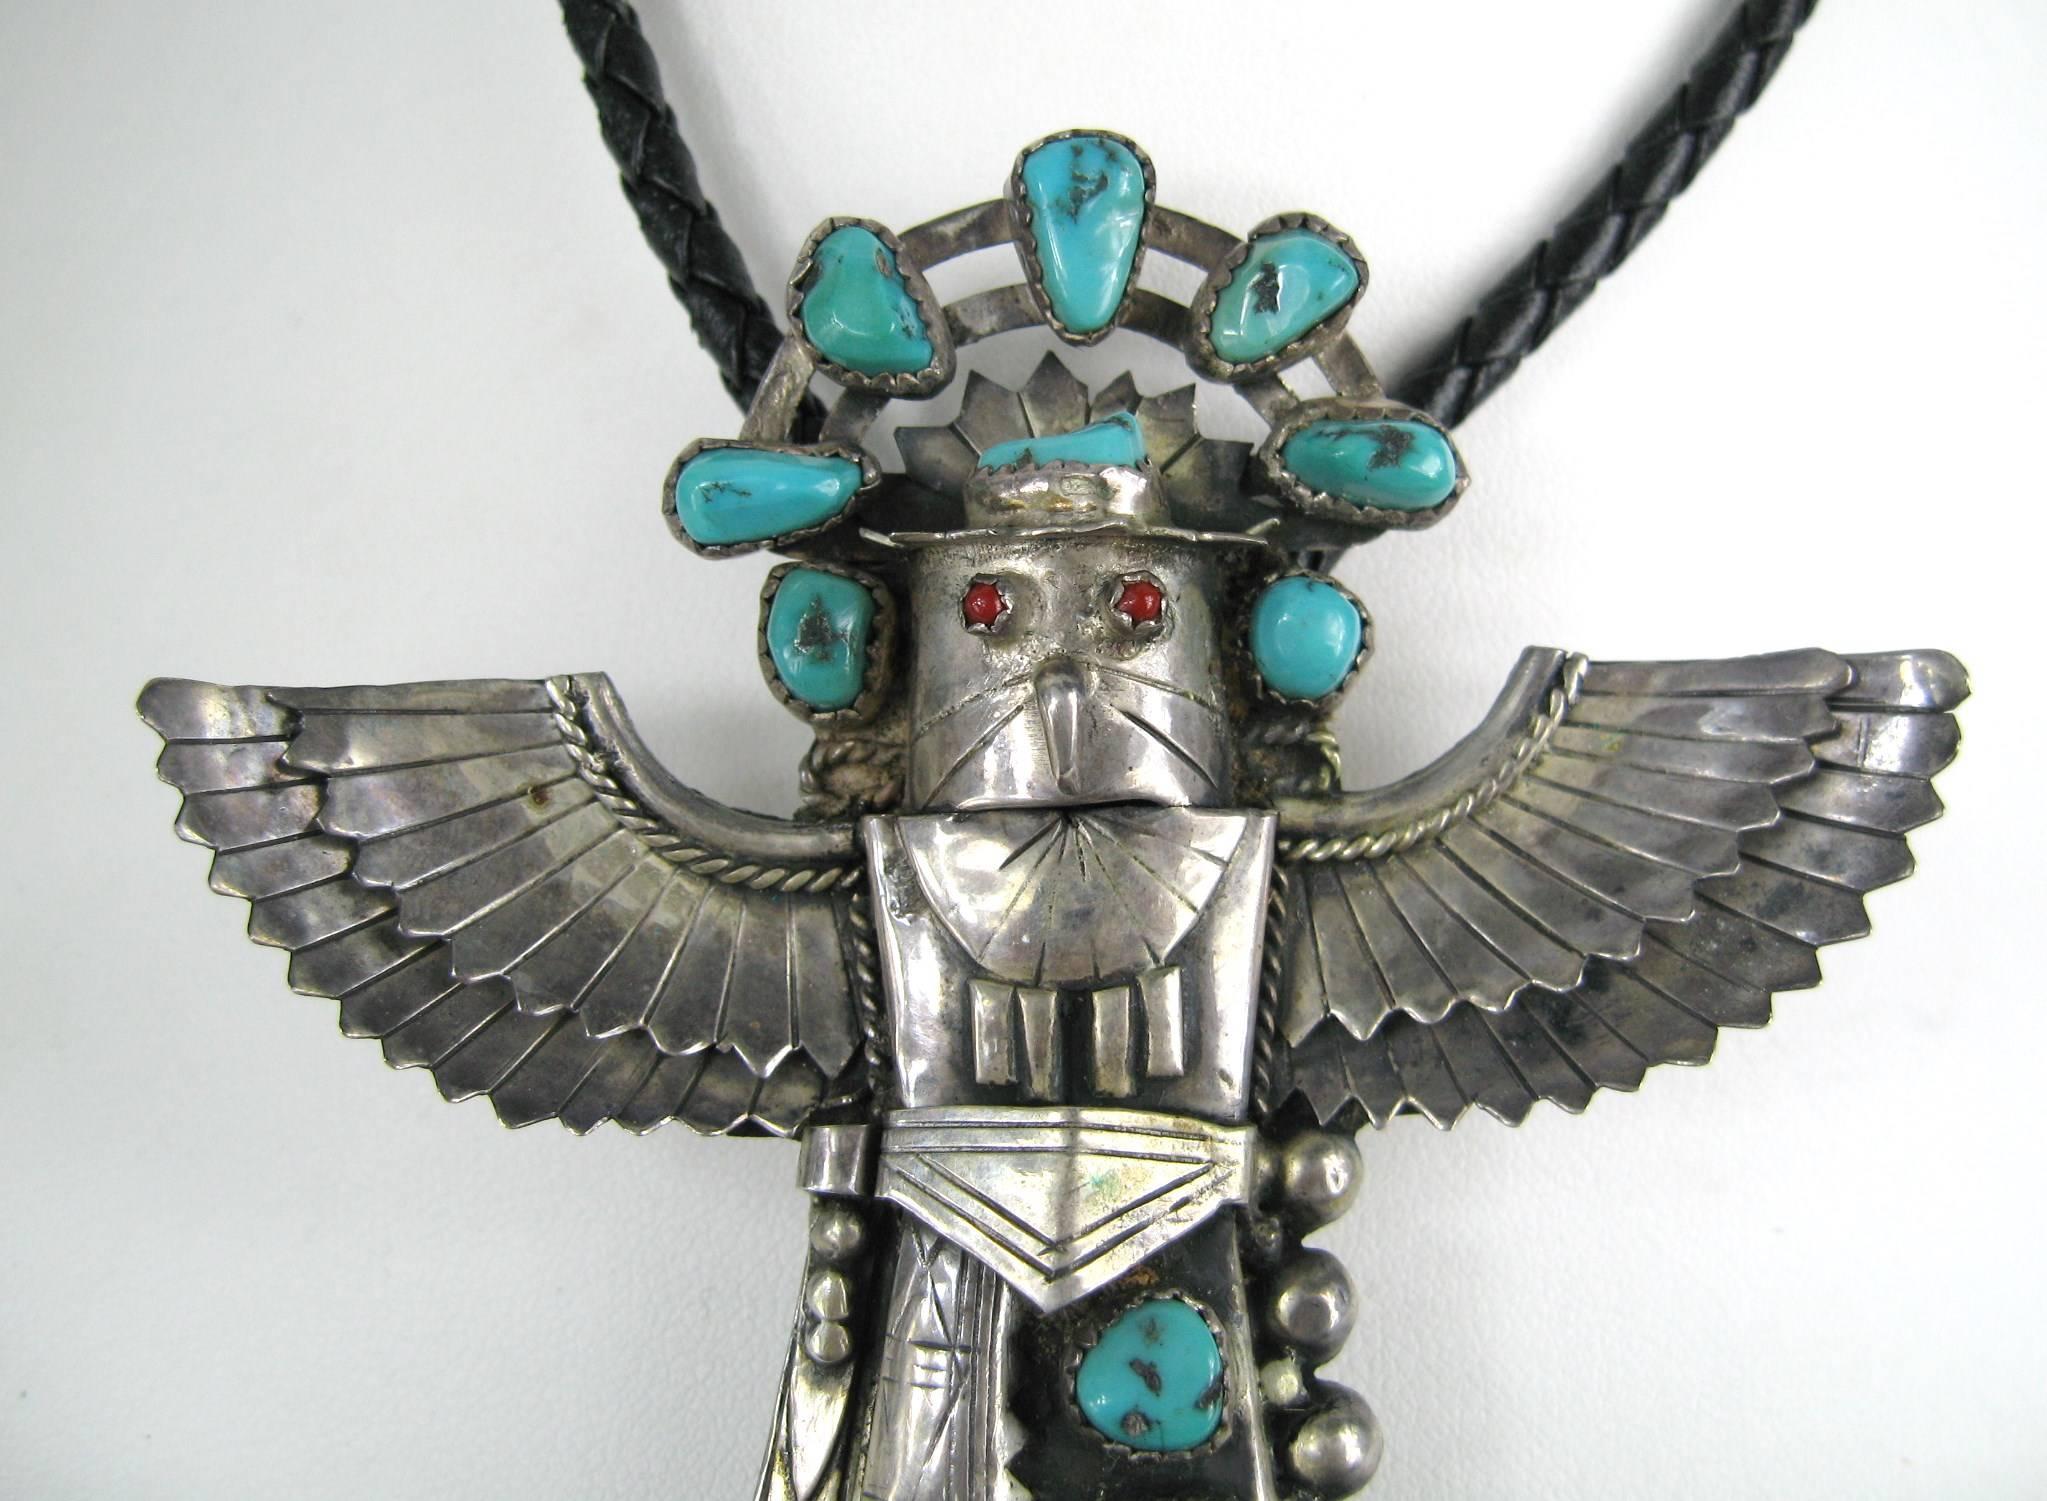 Navajo handmade Sterling Silver & Turquoise EAGLE with coral eyes
Hallmarked on the back BL 
Chunky Kingman Turquoise Stones and Coral Eyes

The center Bolo is 3.30